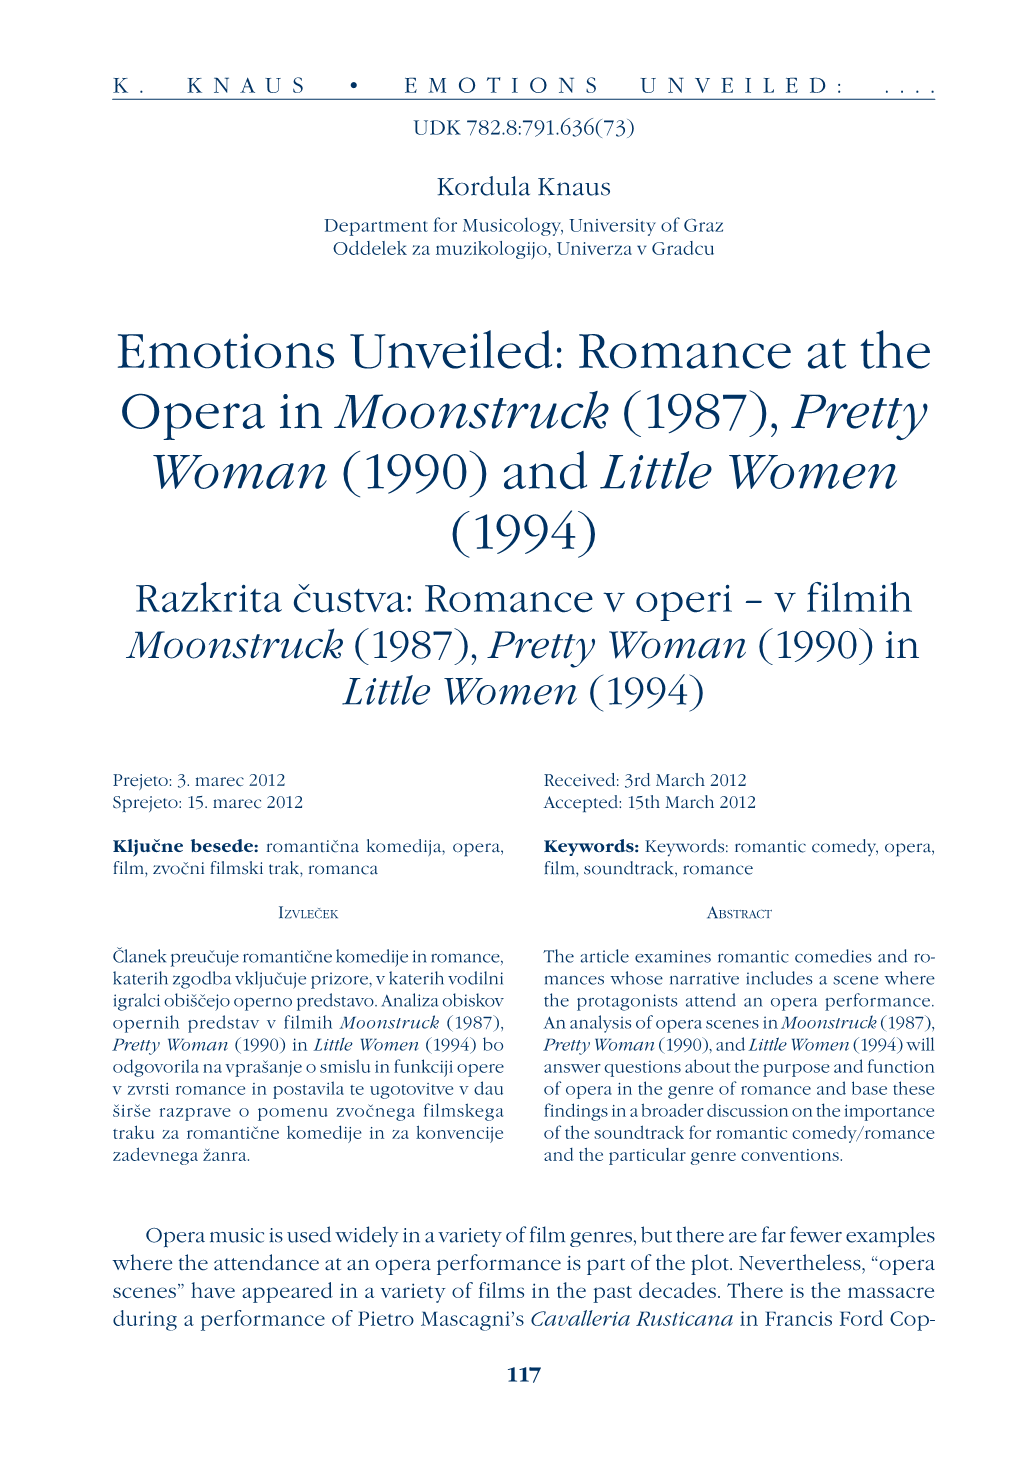 Emotions Unveiled: Romance at the Opera in Moonstruck (1987), Pretty